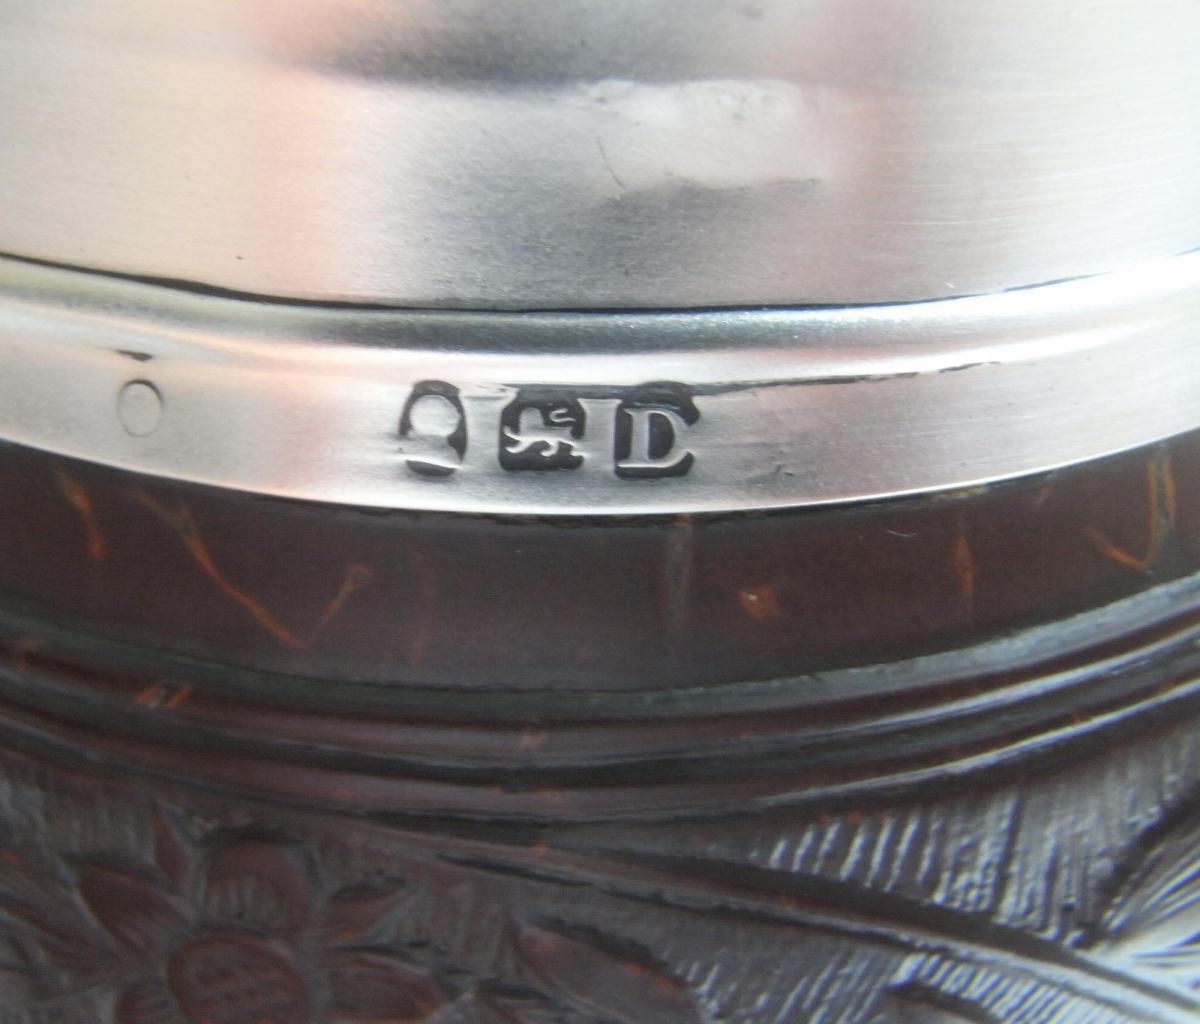 A very rare George III Silver Mounted Heraldic Coconut Cup made in London in 1799 by Phipps & Robinson